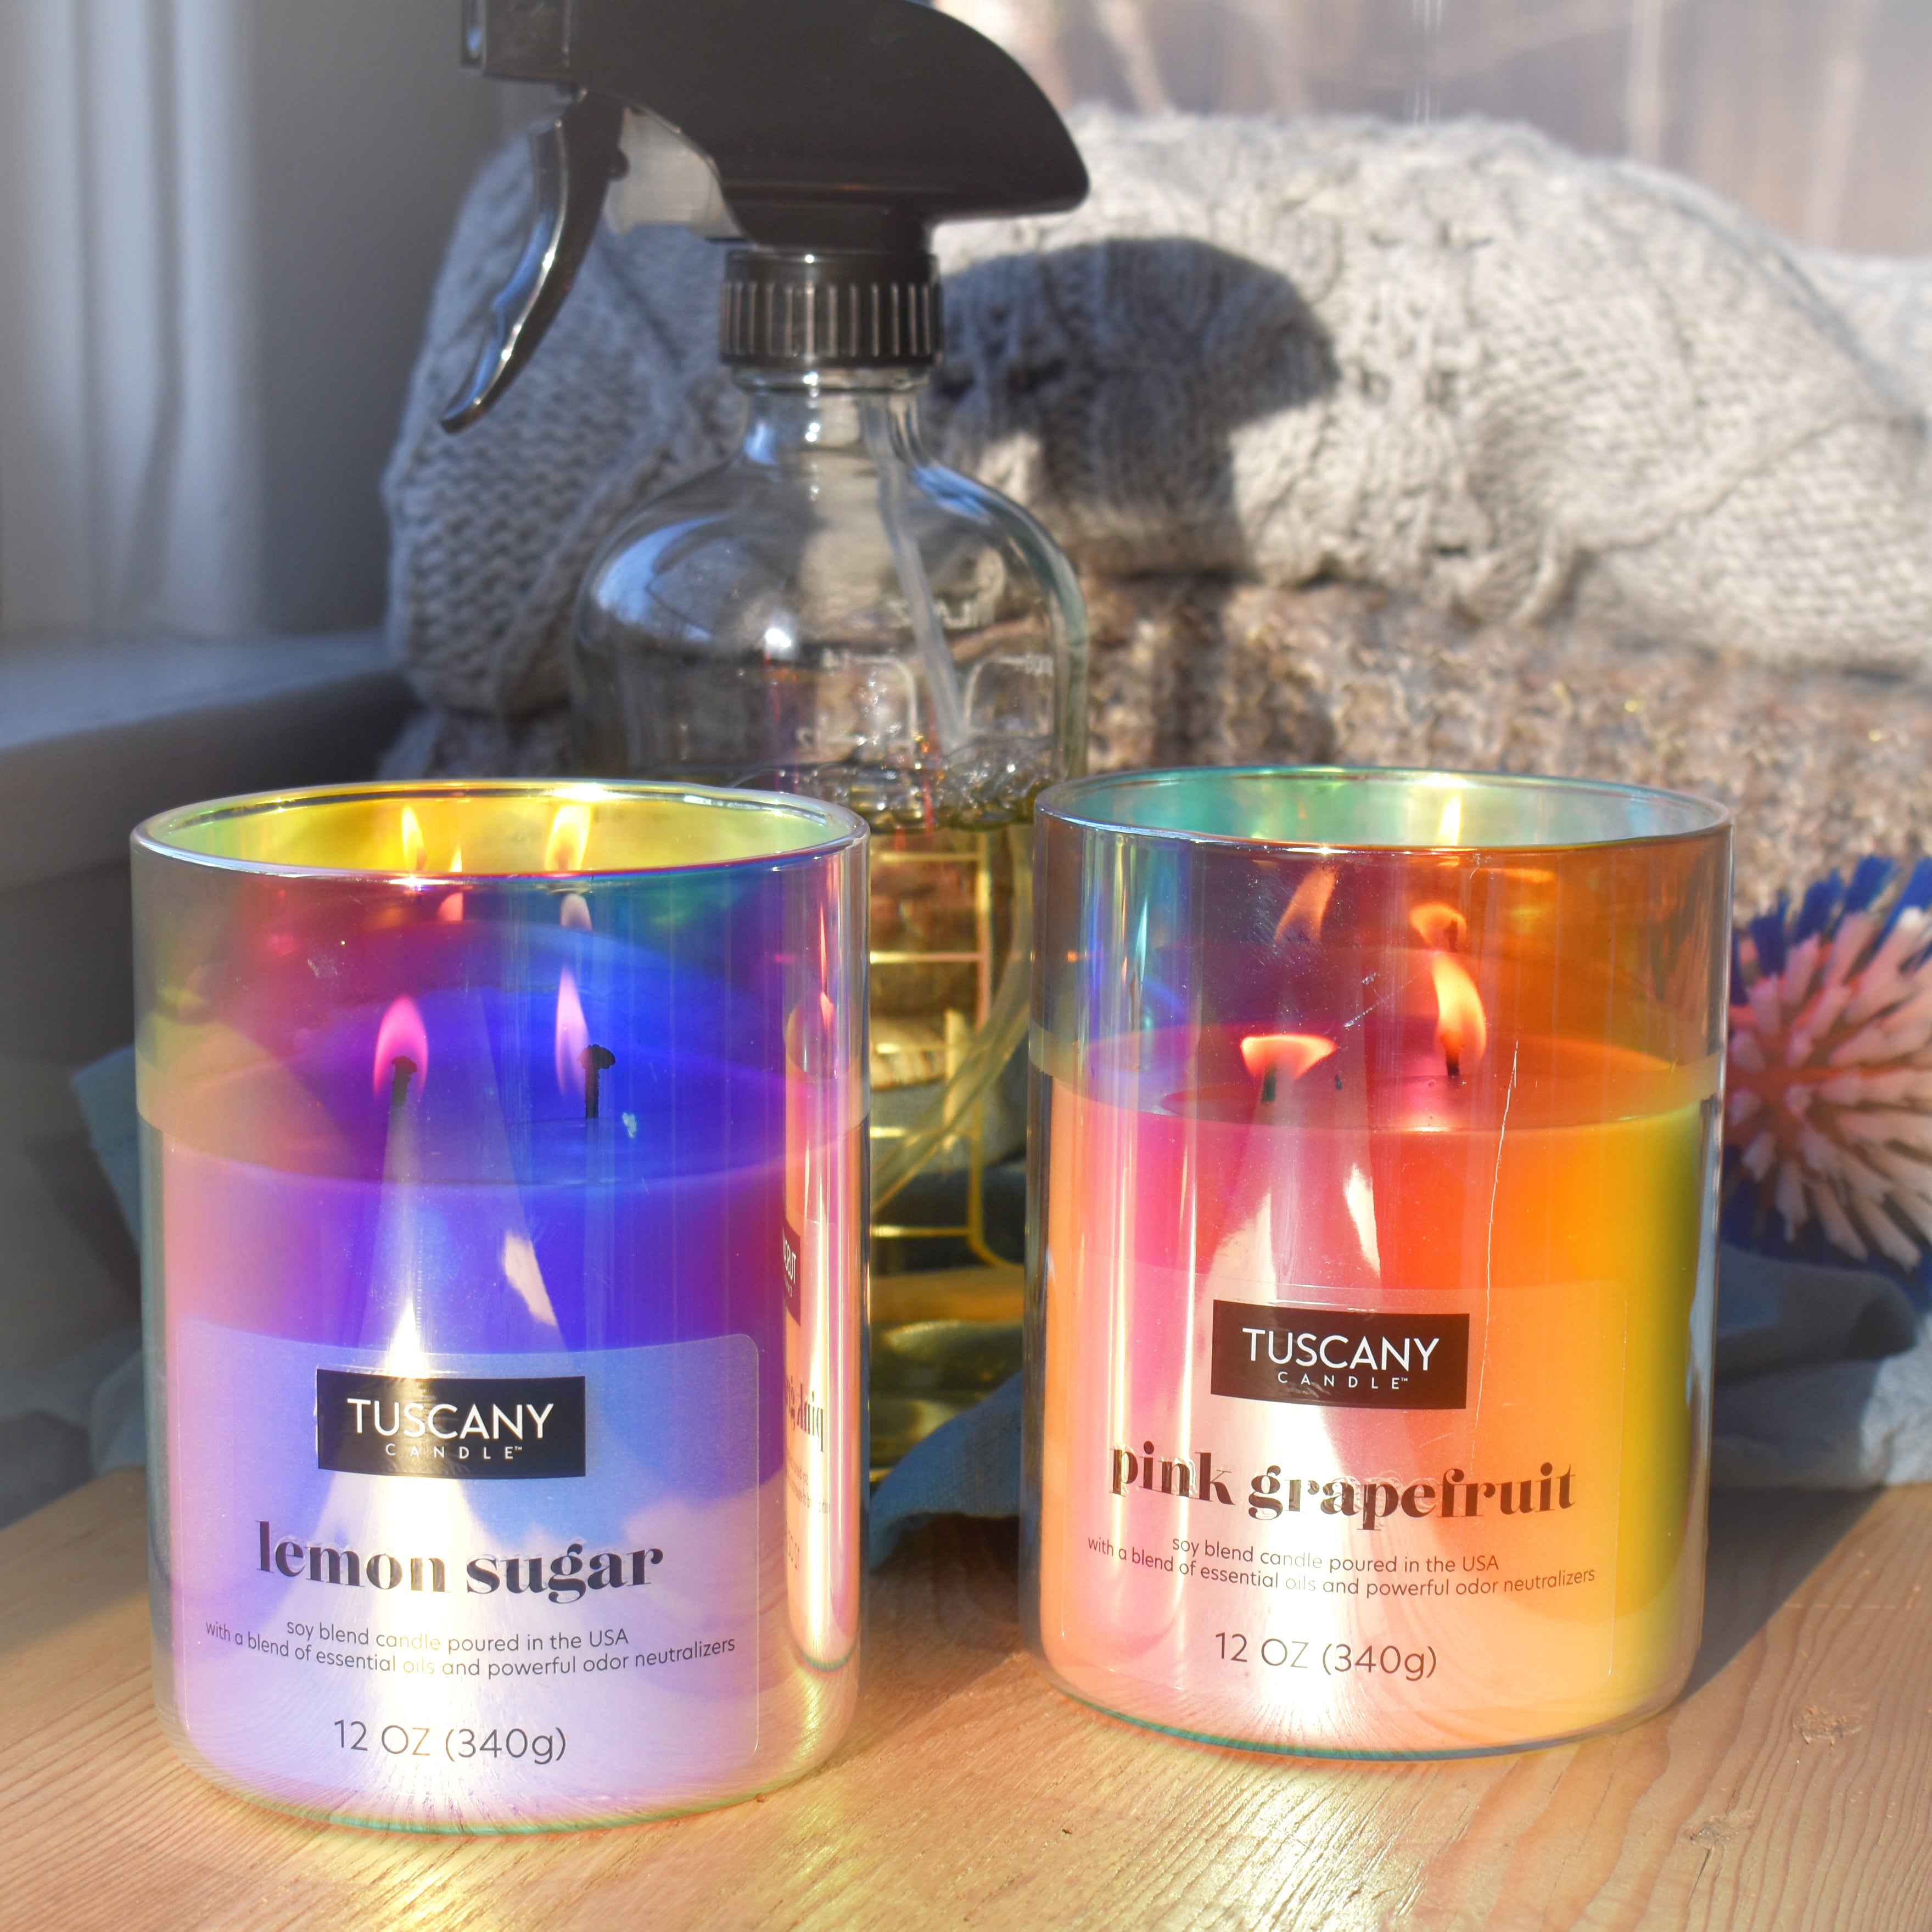 A still life of two candles, including Pink Grapefruit, a mal odor control scented candle from Tuscany' Candle's Serene Clean® collection of  scented candles and fragrance bars